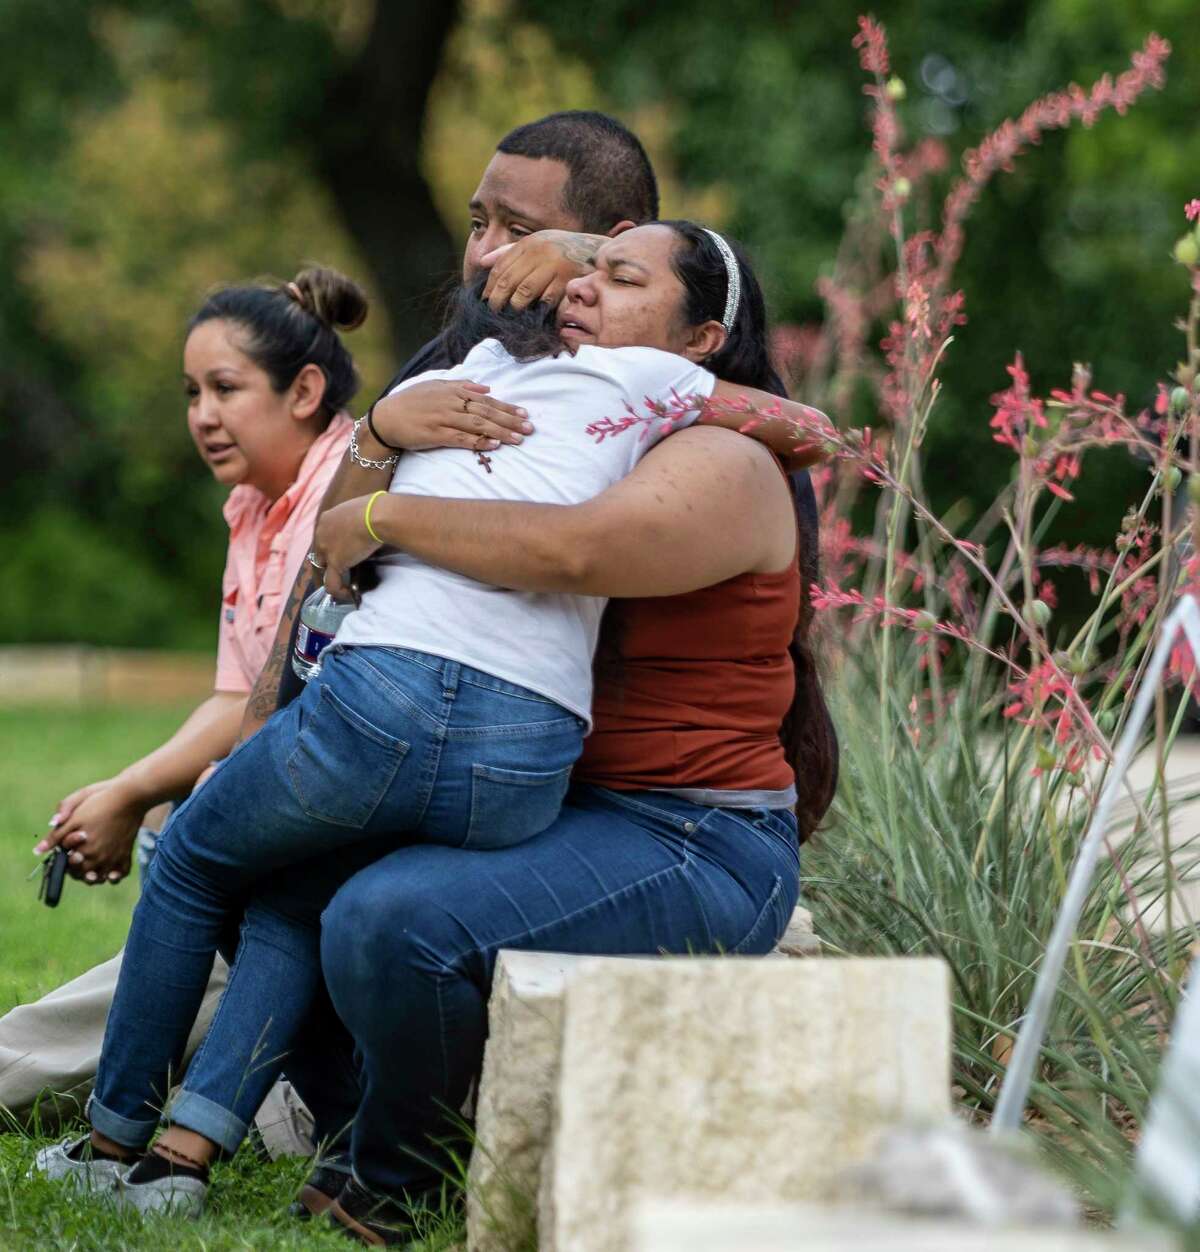 A woman with a rosary in her hand his a child Tuesday, May 24, 2022 outside the Uvalde civic center where parents were being reunited with their children after at least 14 students and 1 teacher were killed when a gunman opened fire at Robb Elementary School in Uvalde.